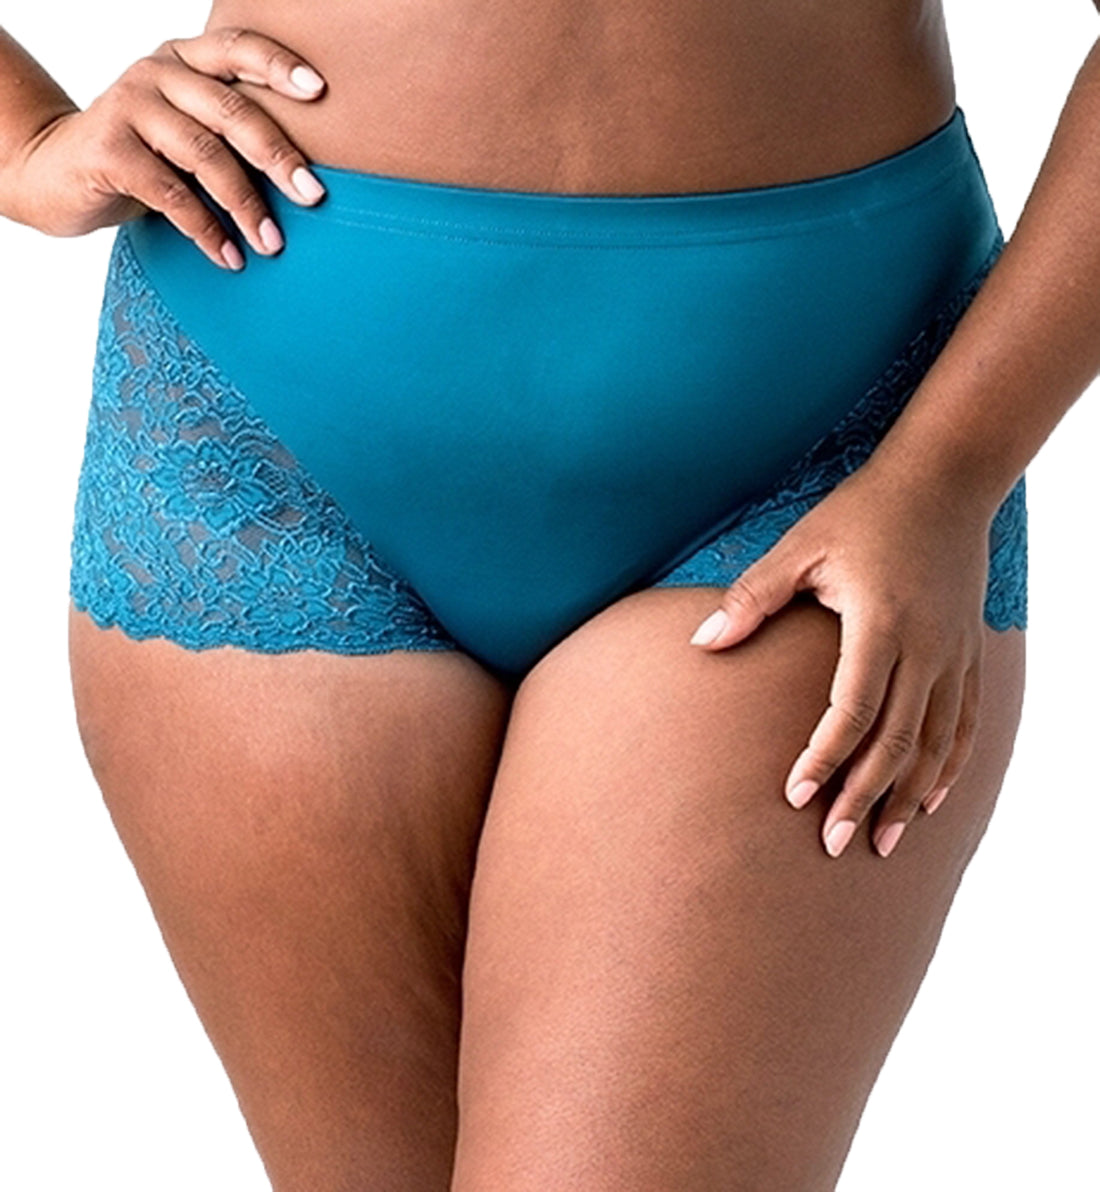 Elila Stretch Lace Cheeky Full Panty (3311)- Teal - Breakout Bras